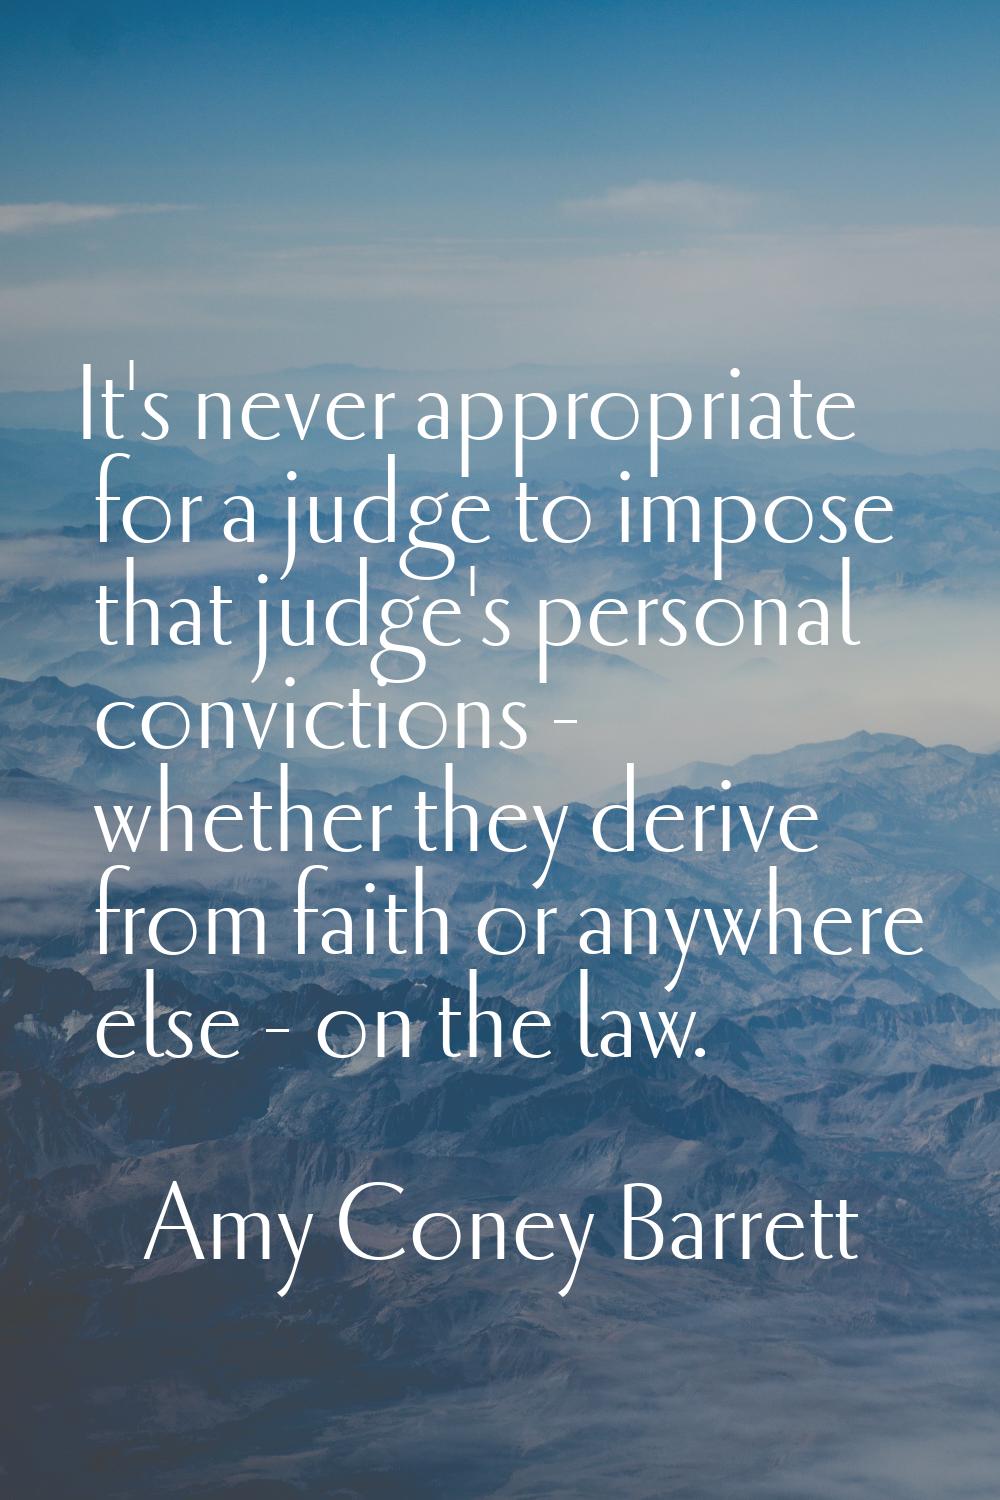 It's never appropriate for a judge to impose that judge's personal convictions - whether they deriv